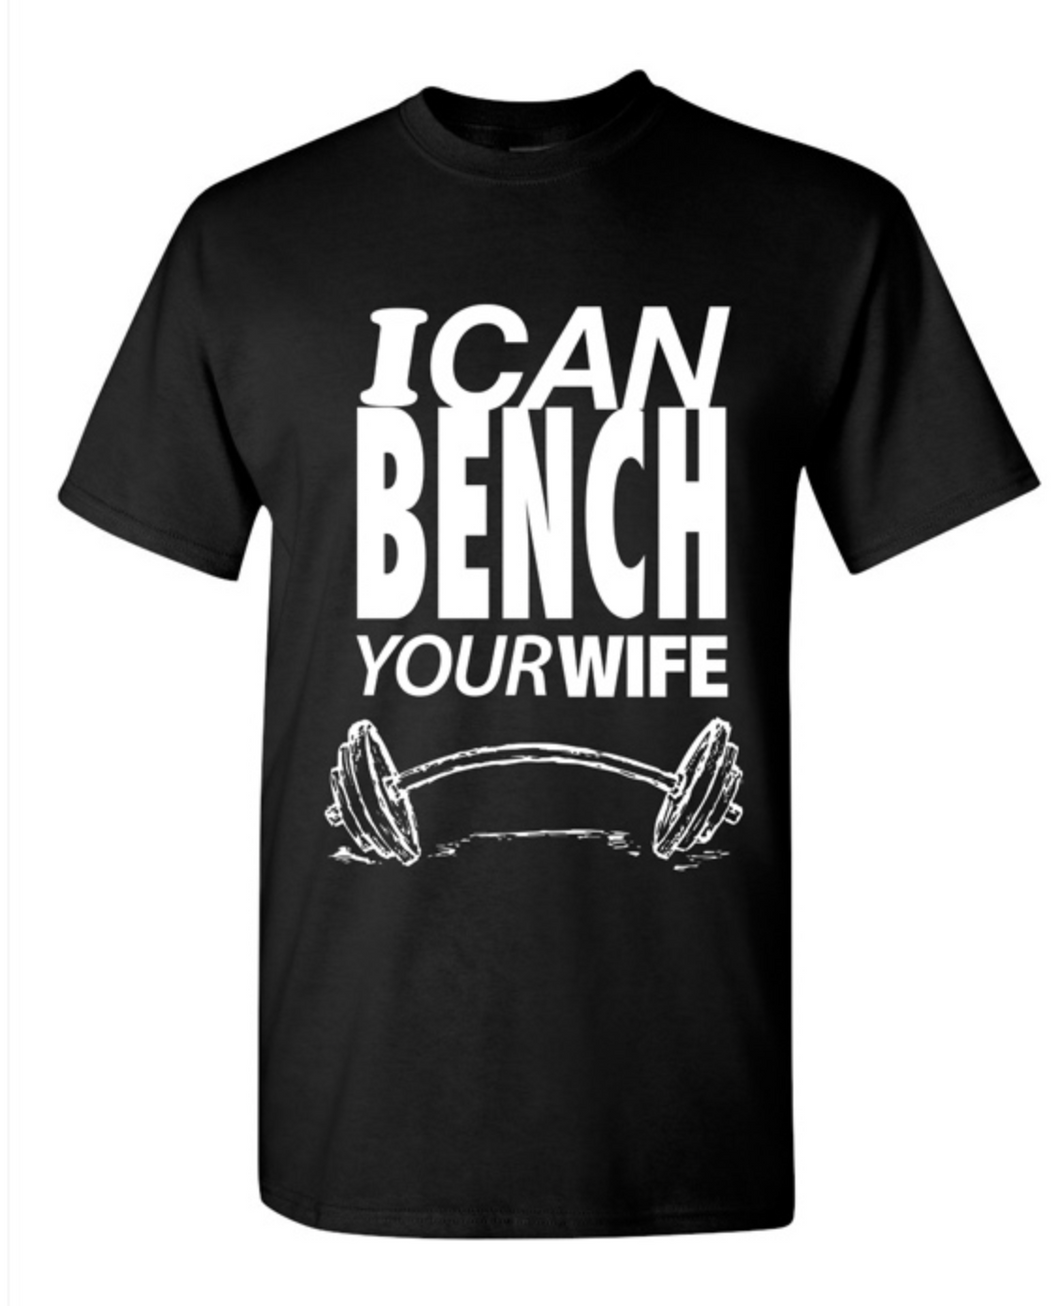 Bench Your Wife Tee